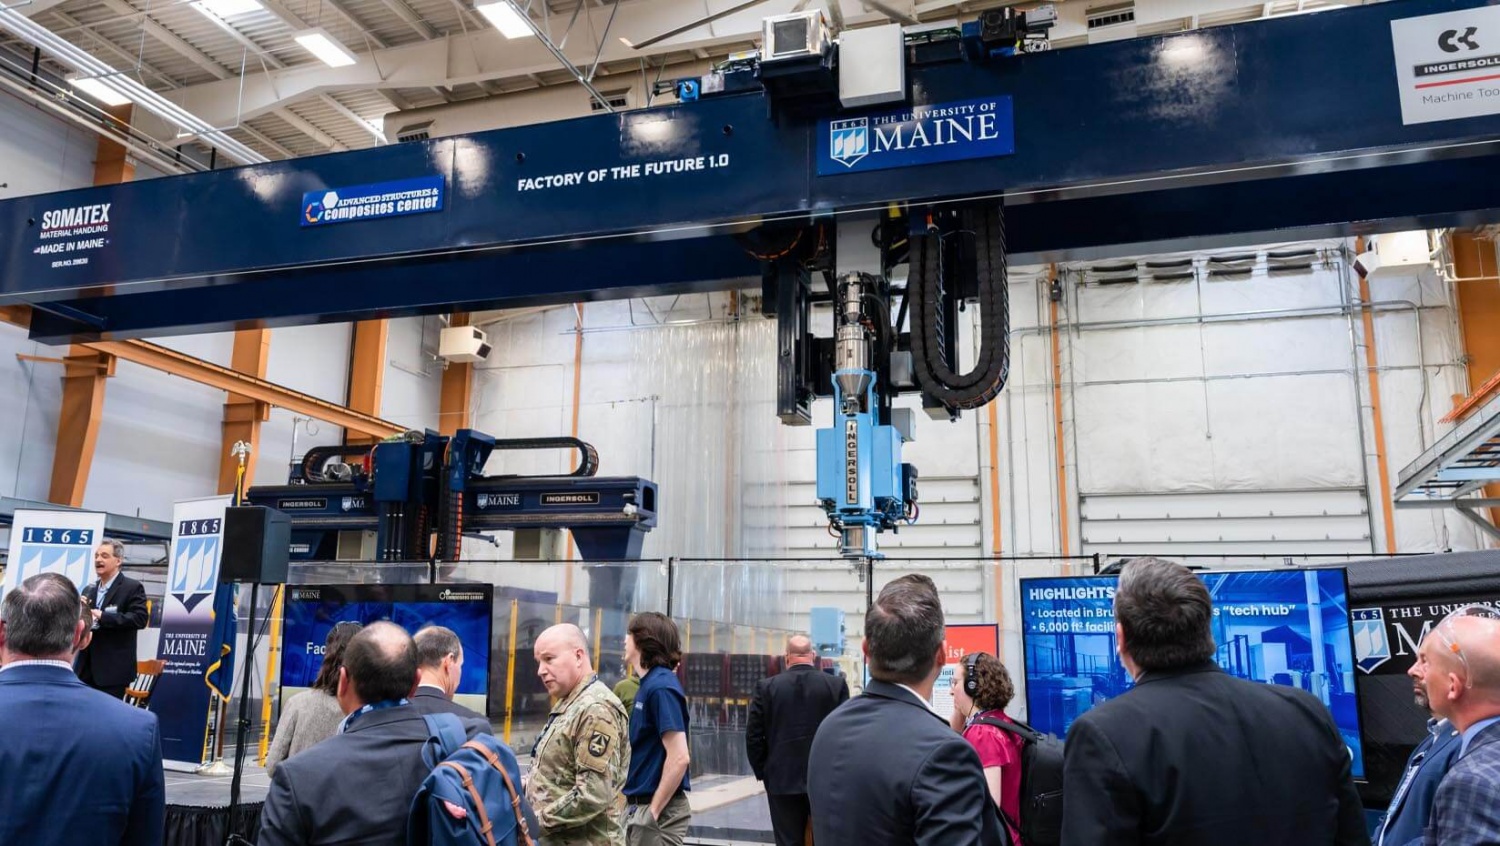 UMaine’s new 3D printer smashes former Guinness World Record to advance the next generation of advanced manufacturing